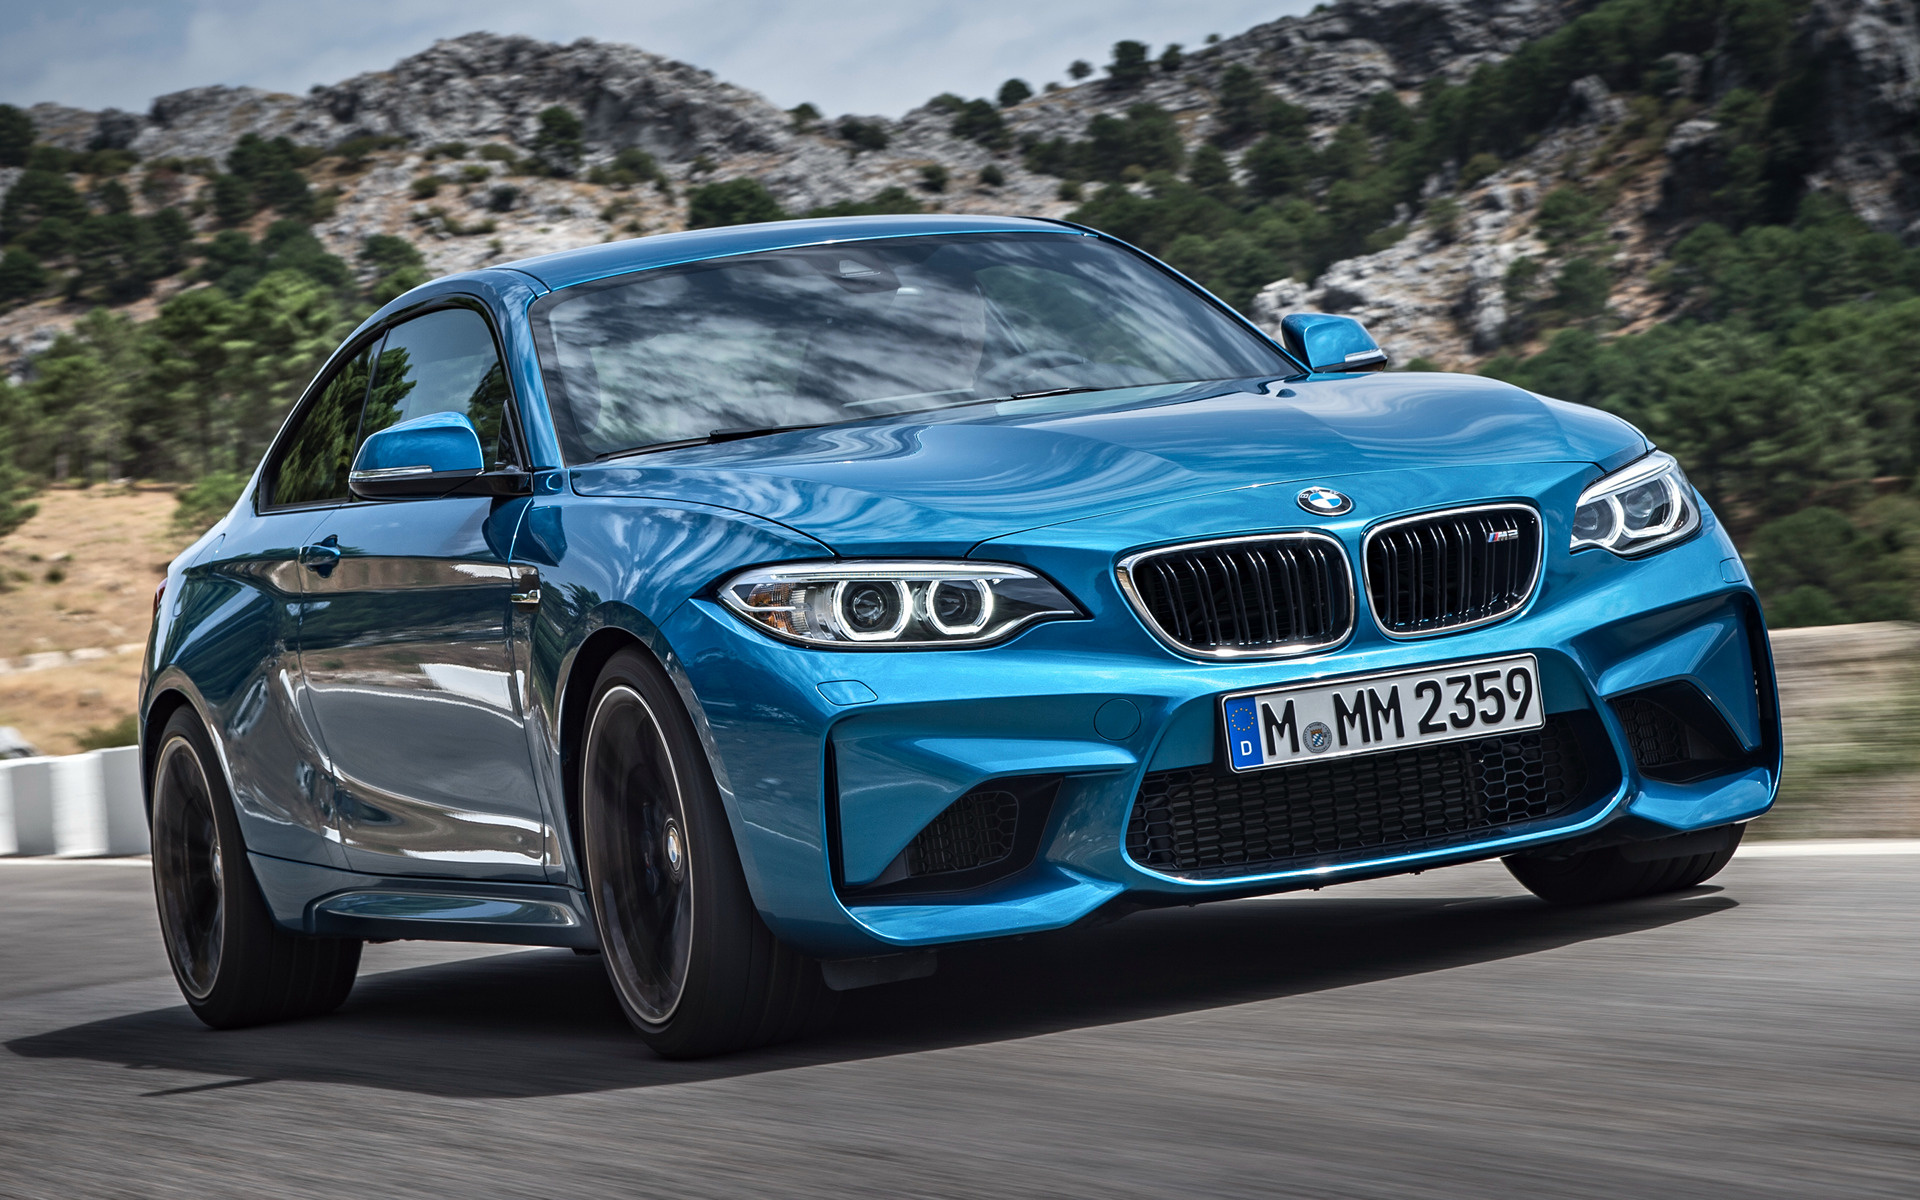 BMW M2 Coupe 2015 Wallpapers and HD Images